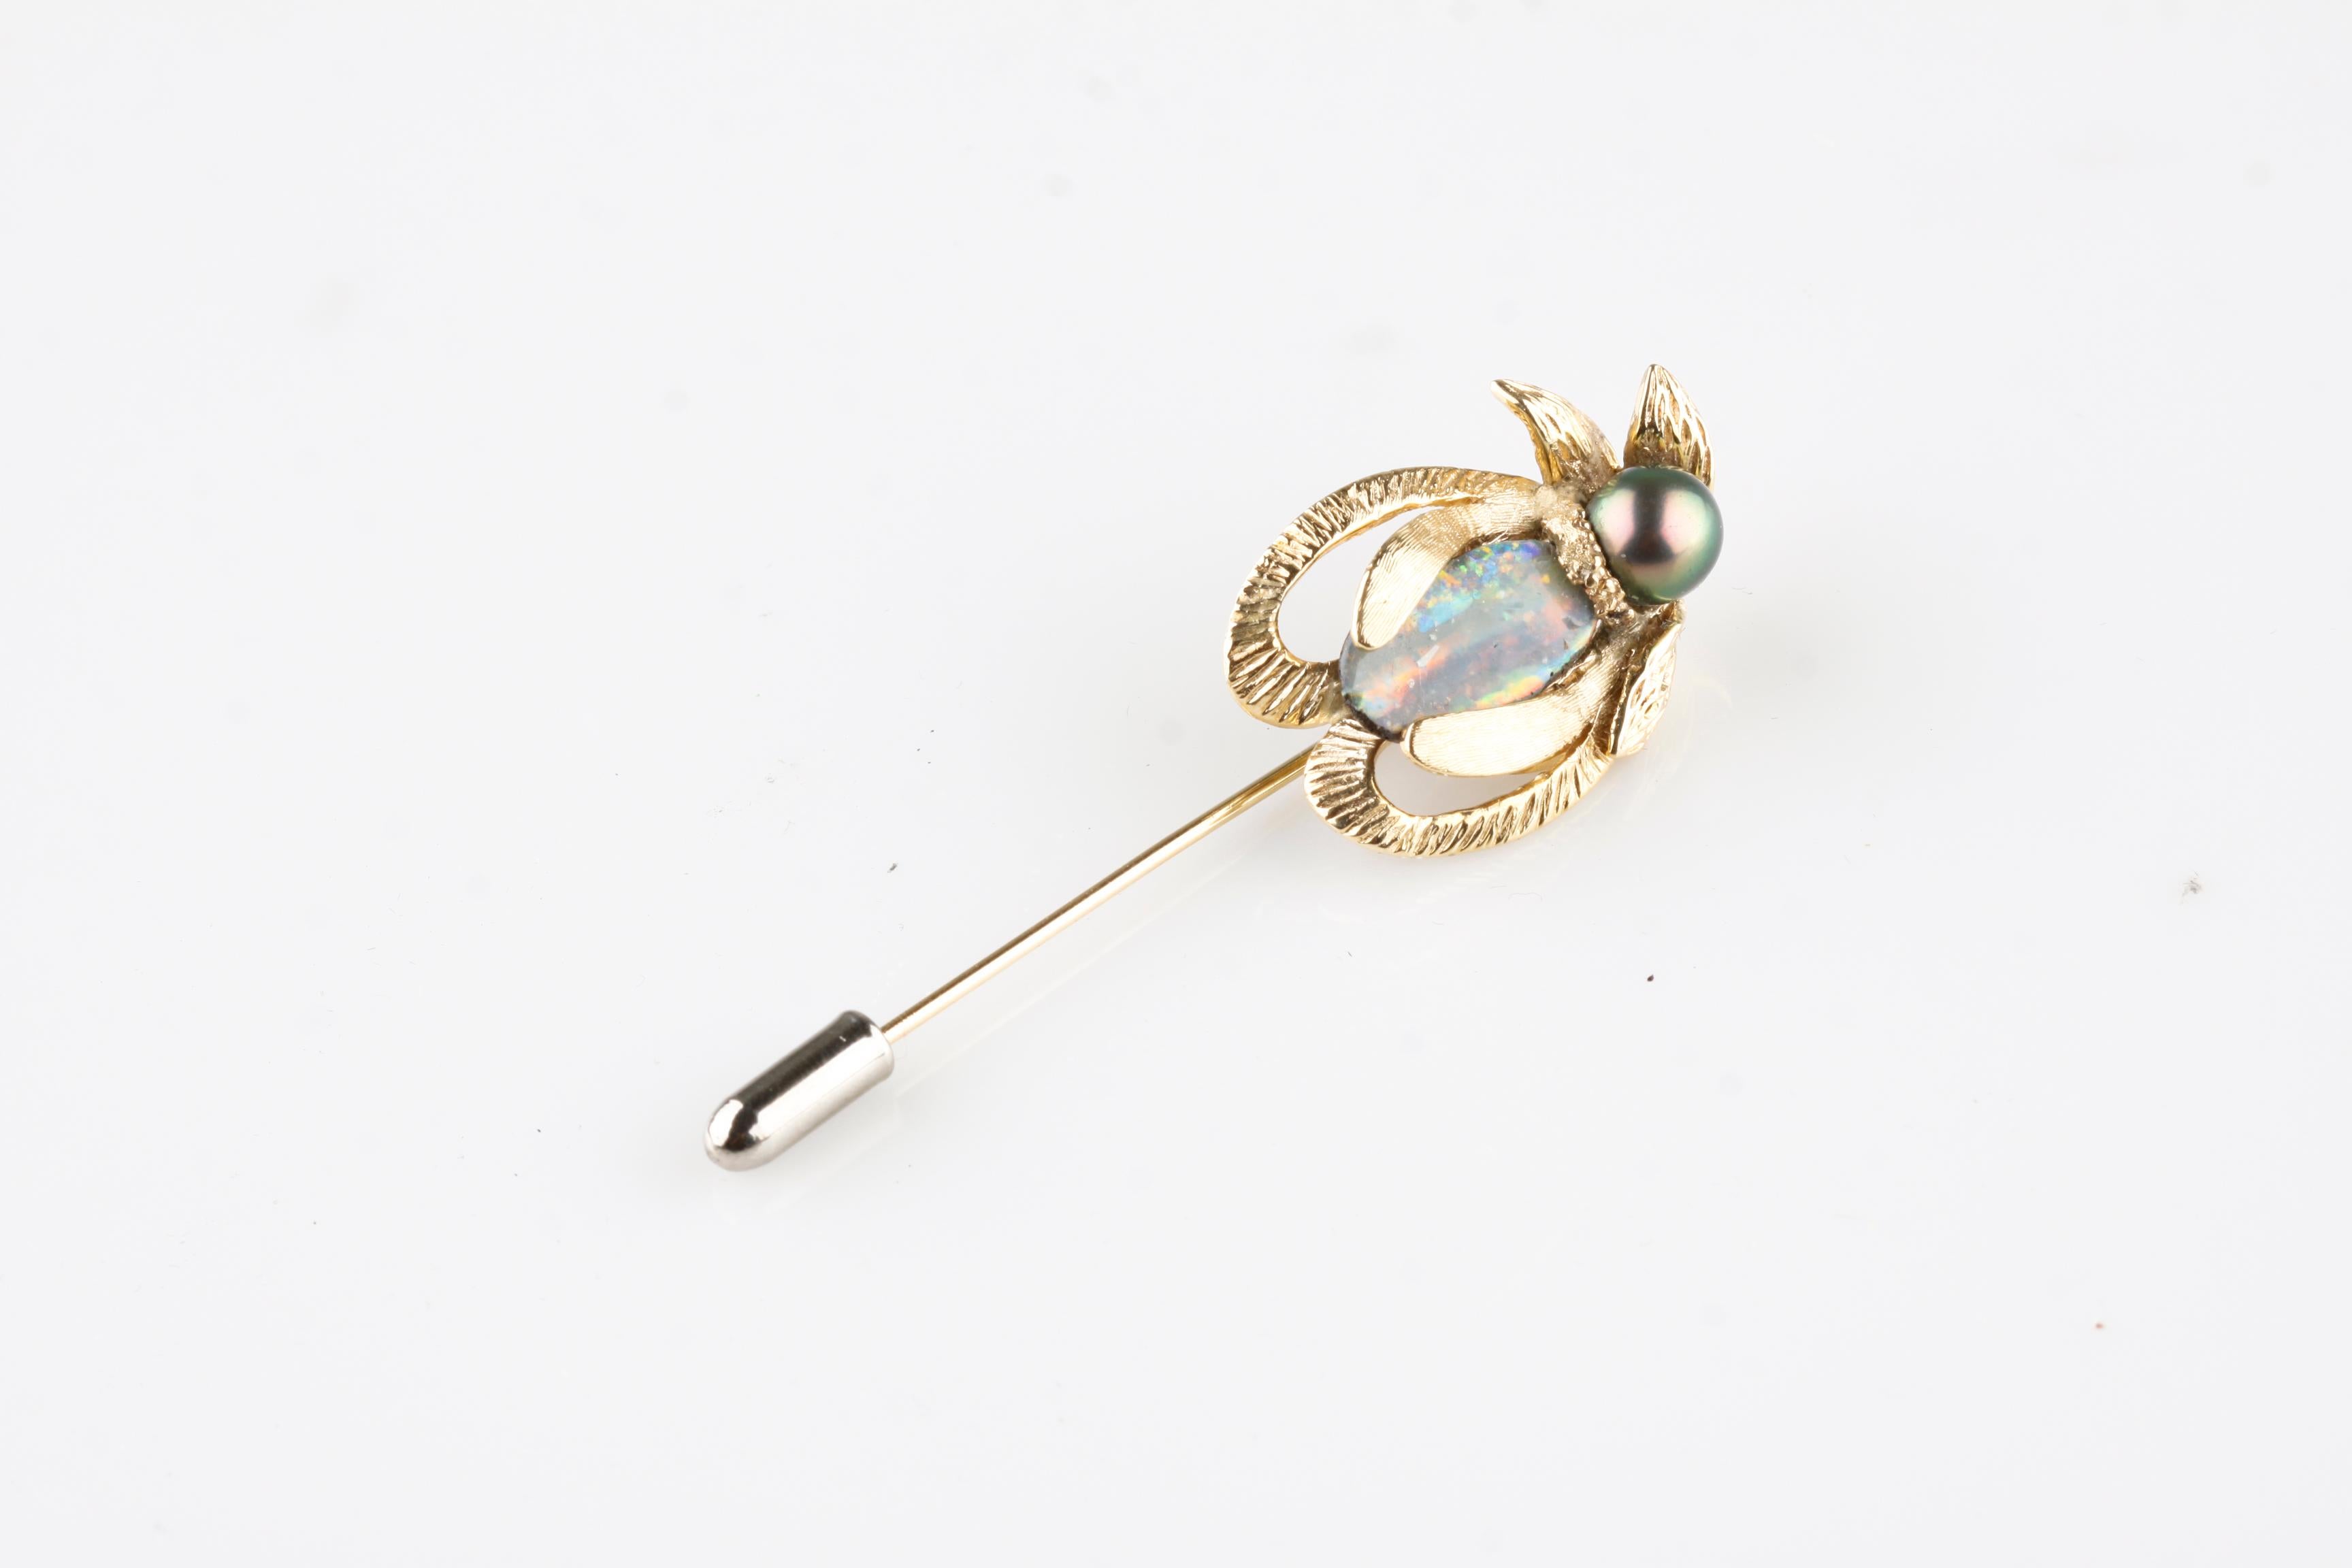 Gorgeous 14k Yellow Gold Pin with Ornate Design and Tahitian Pearl and Opal Cabochon Accents
Total Length of Pin = 67 mm
Length of Beetle = 29 mm
Width of Beetle = 20 mm
Total Mass = 9.6 grams
Approximate Carat Weight of Opal = 4.12 ct
Tahitian